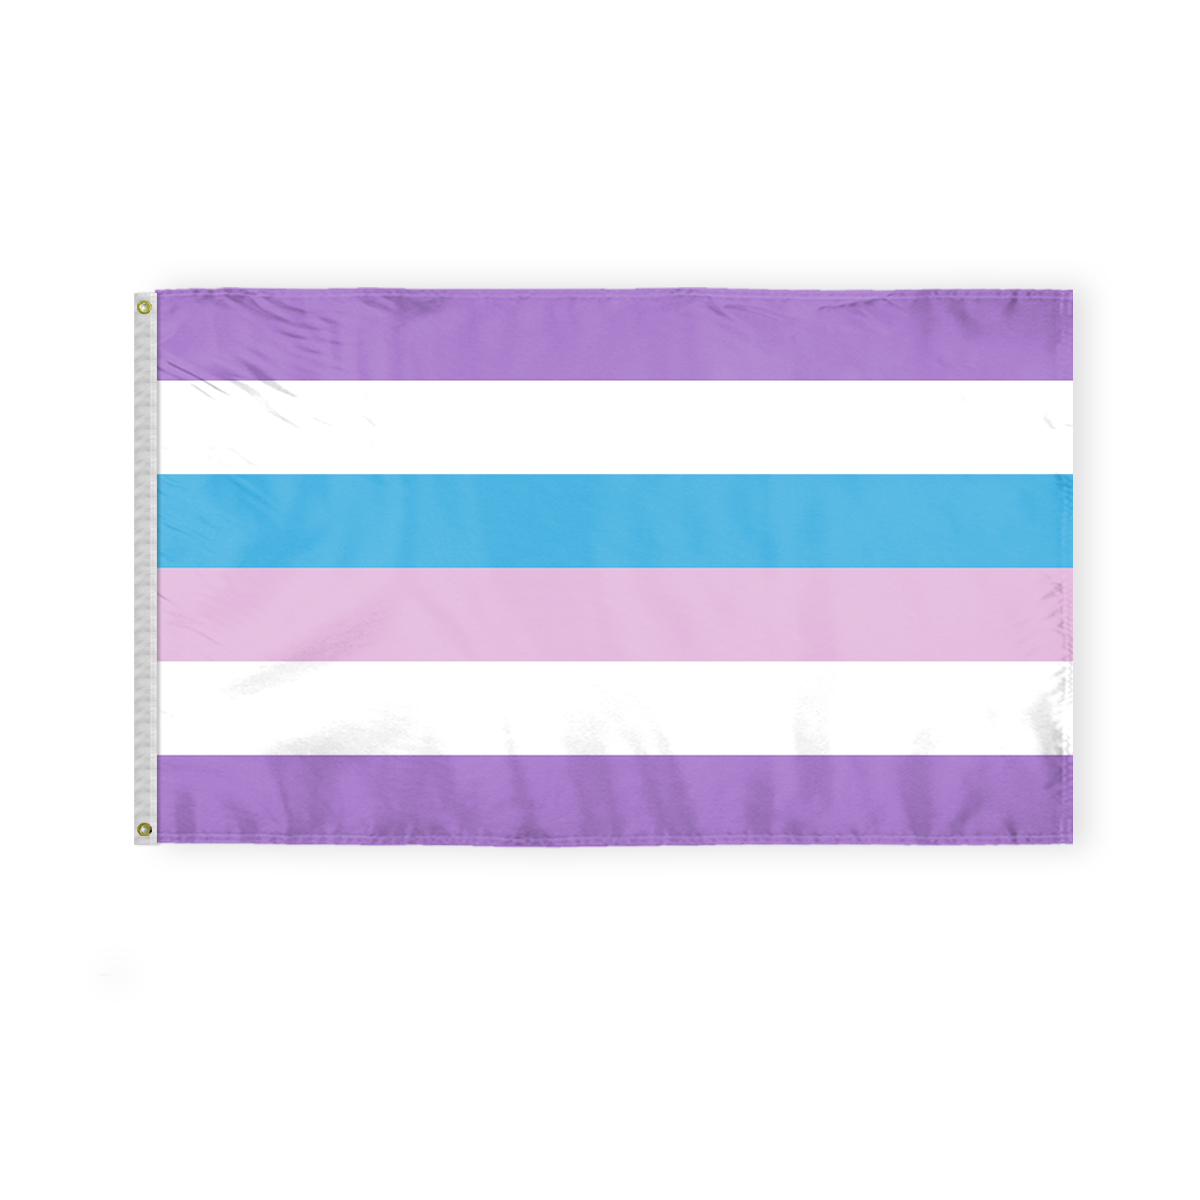 AGAS Bigender Pride Flag 3x5 Ft - Double Sided Polyester